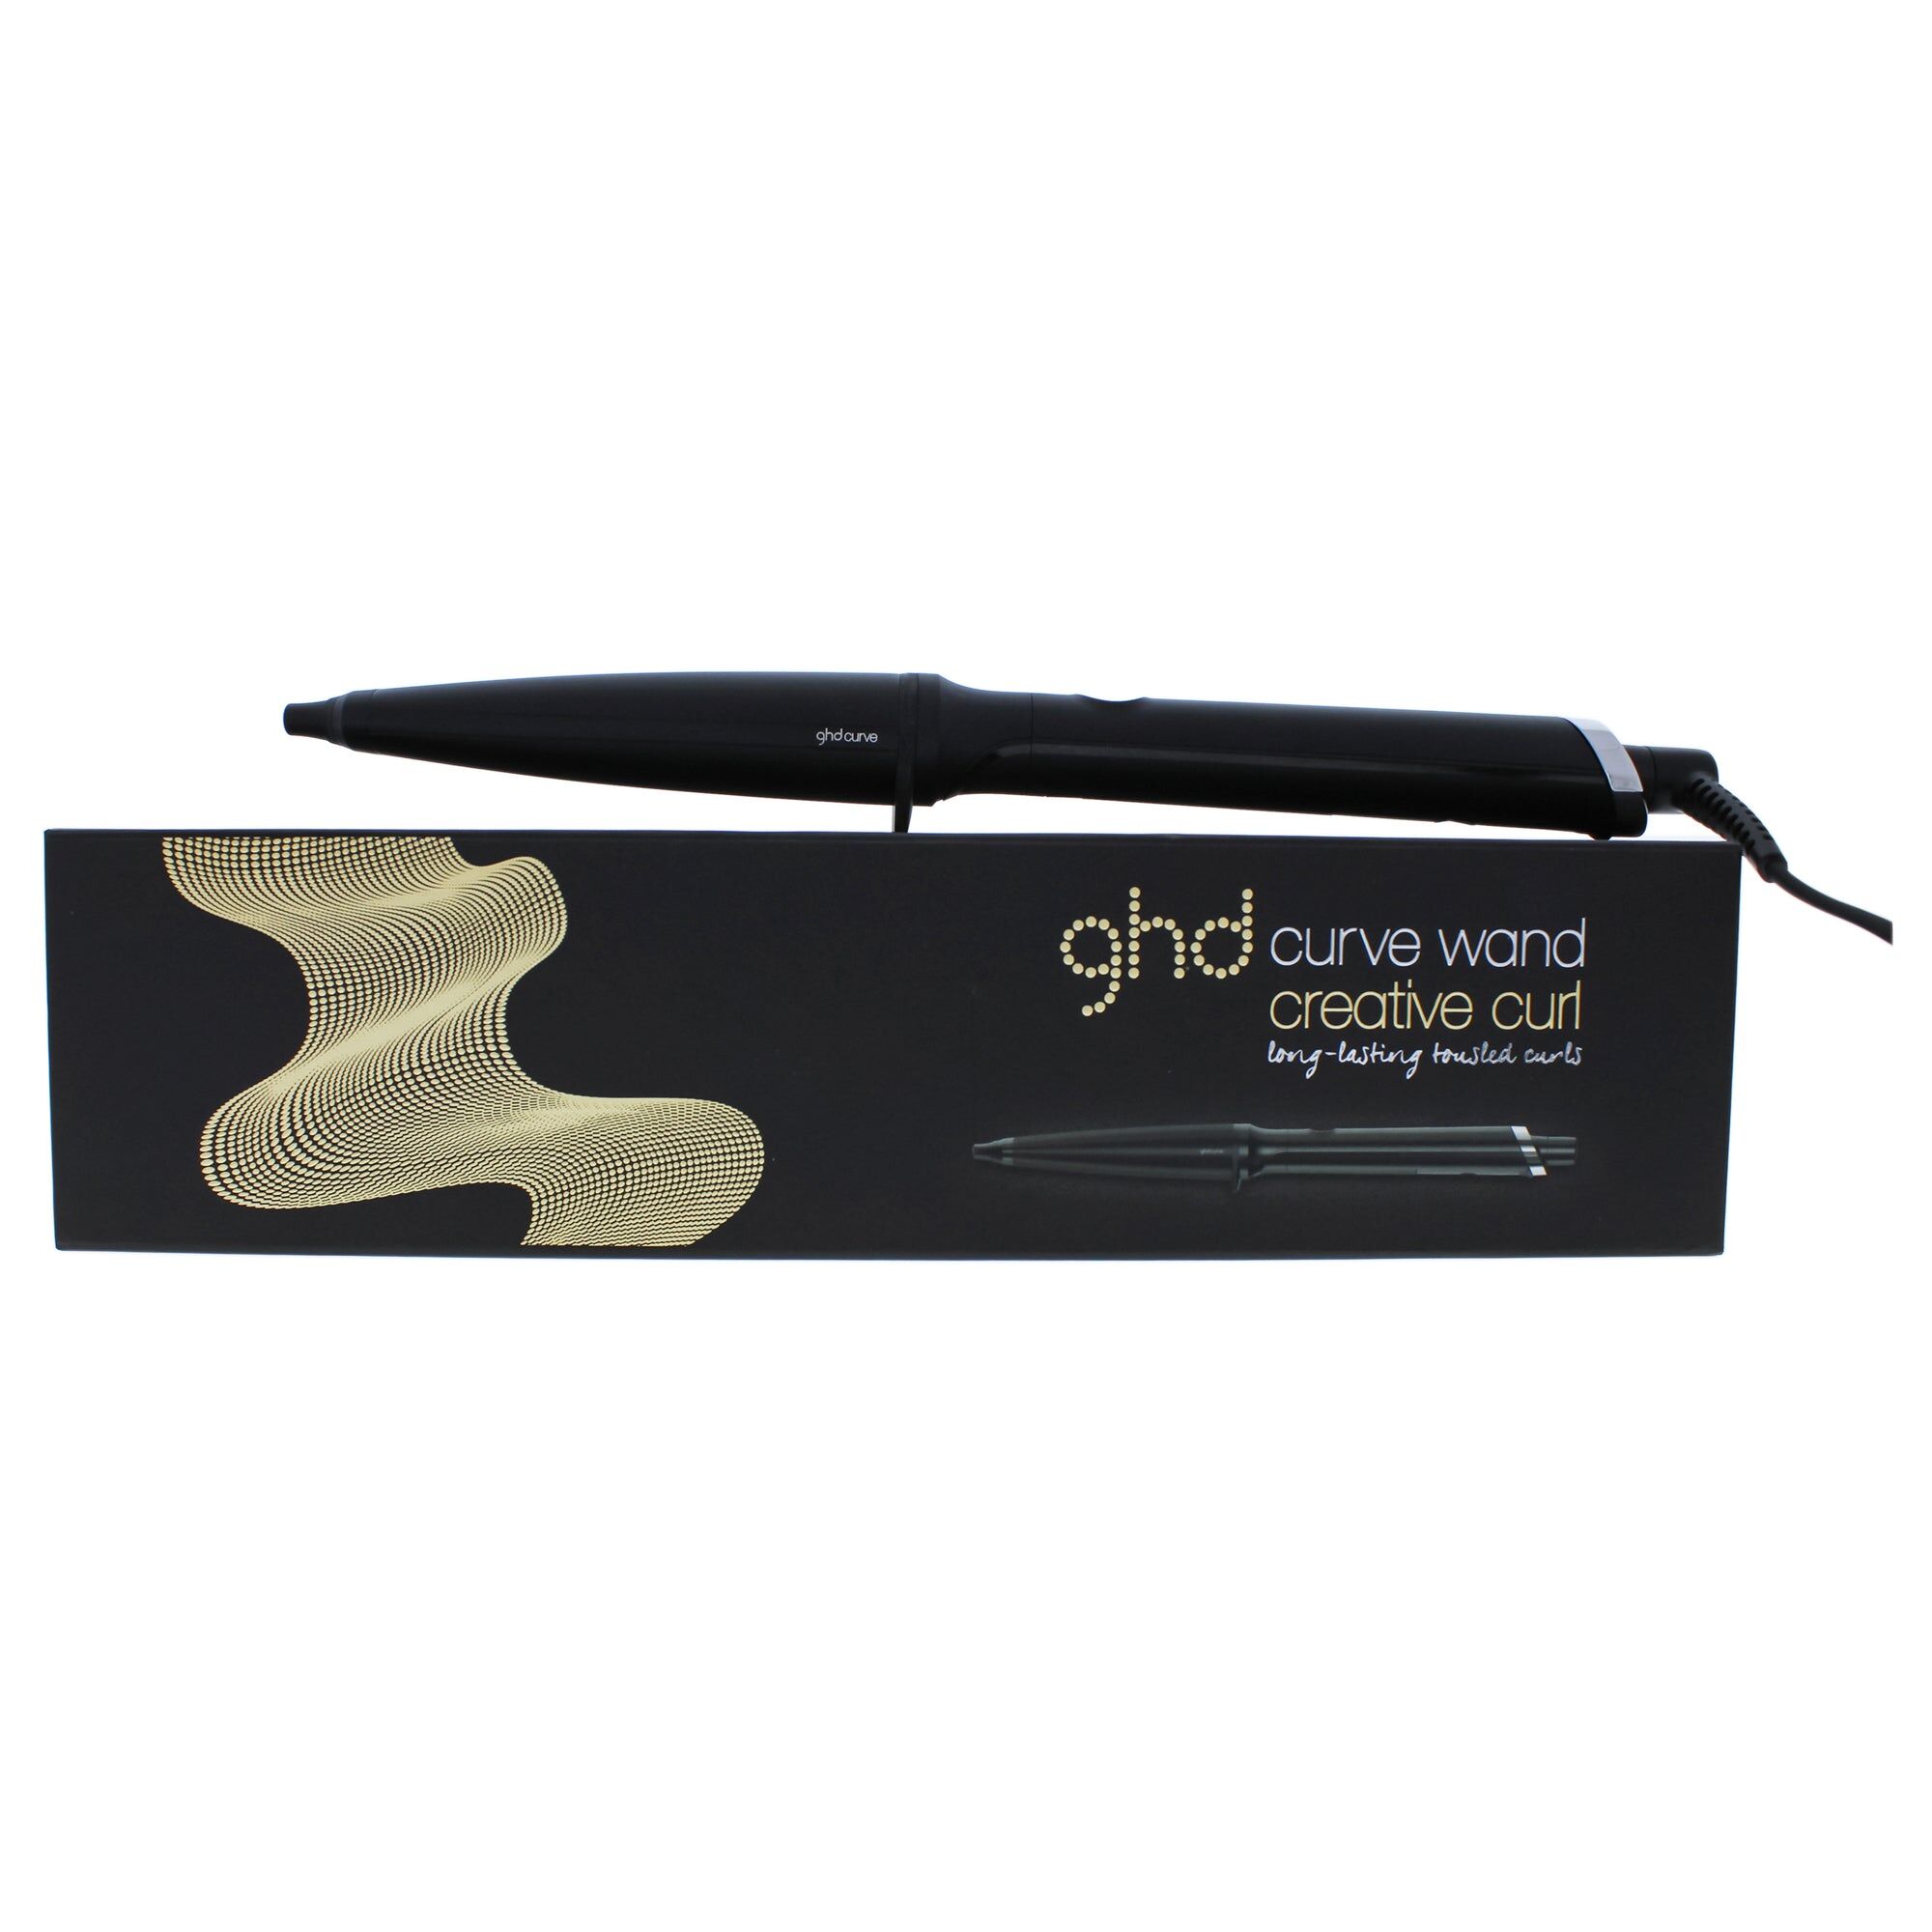 Curve Creative Curl Wand - Model CTWA22 - Black by GHD for Unisex - 1 Inch Curling Iron One Size unisex